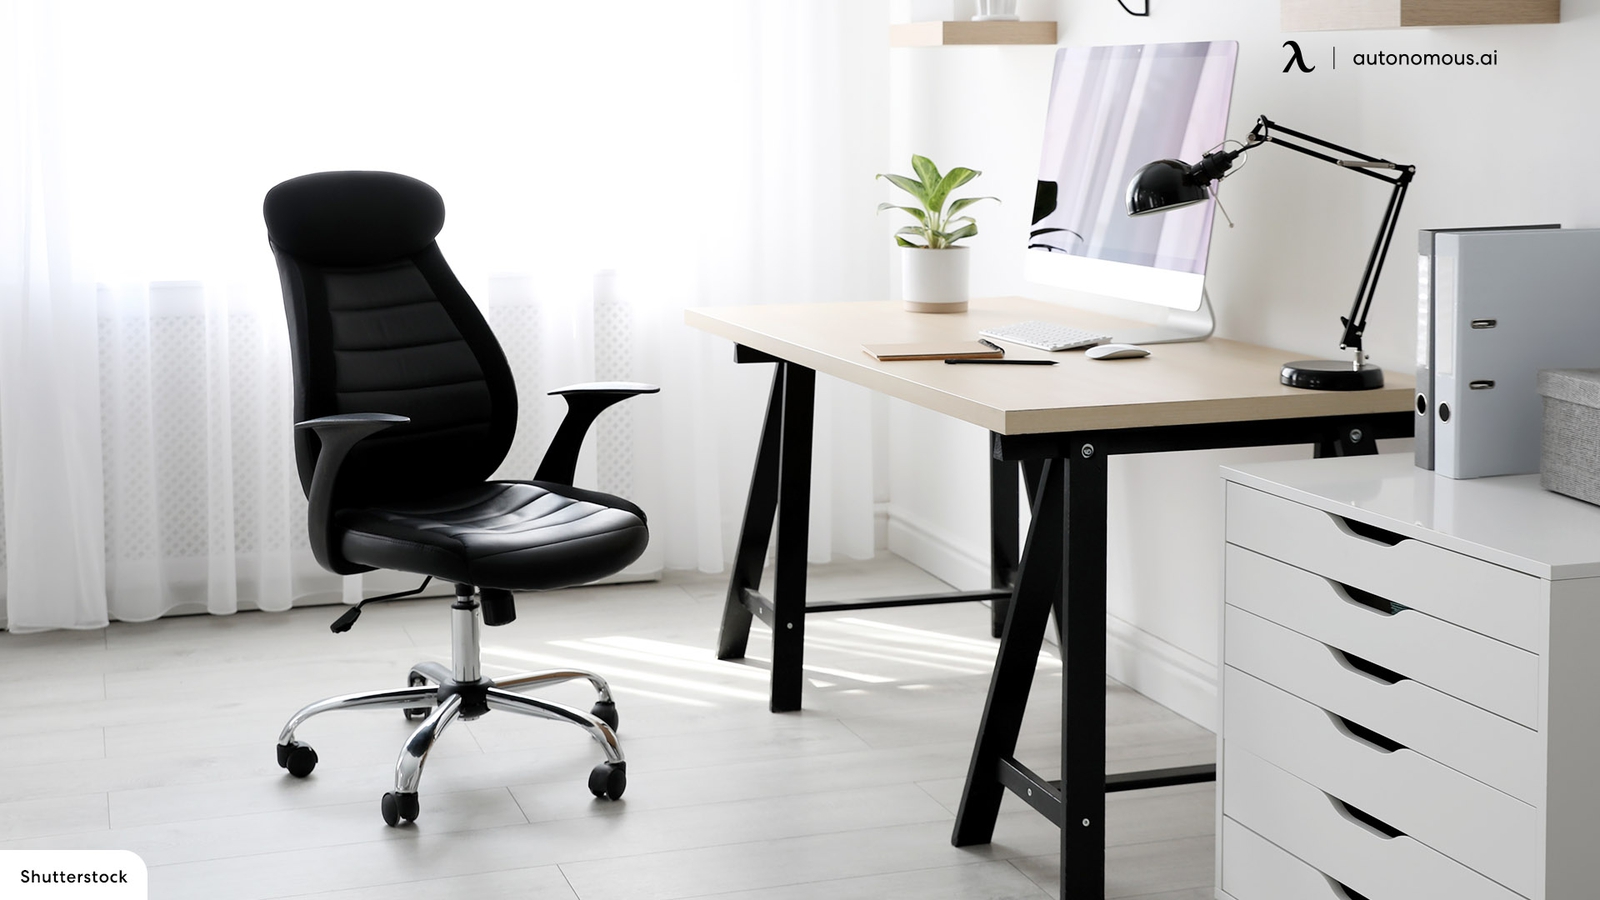 Top 25 Home Office Chairs to Upgrade Your Workspace